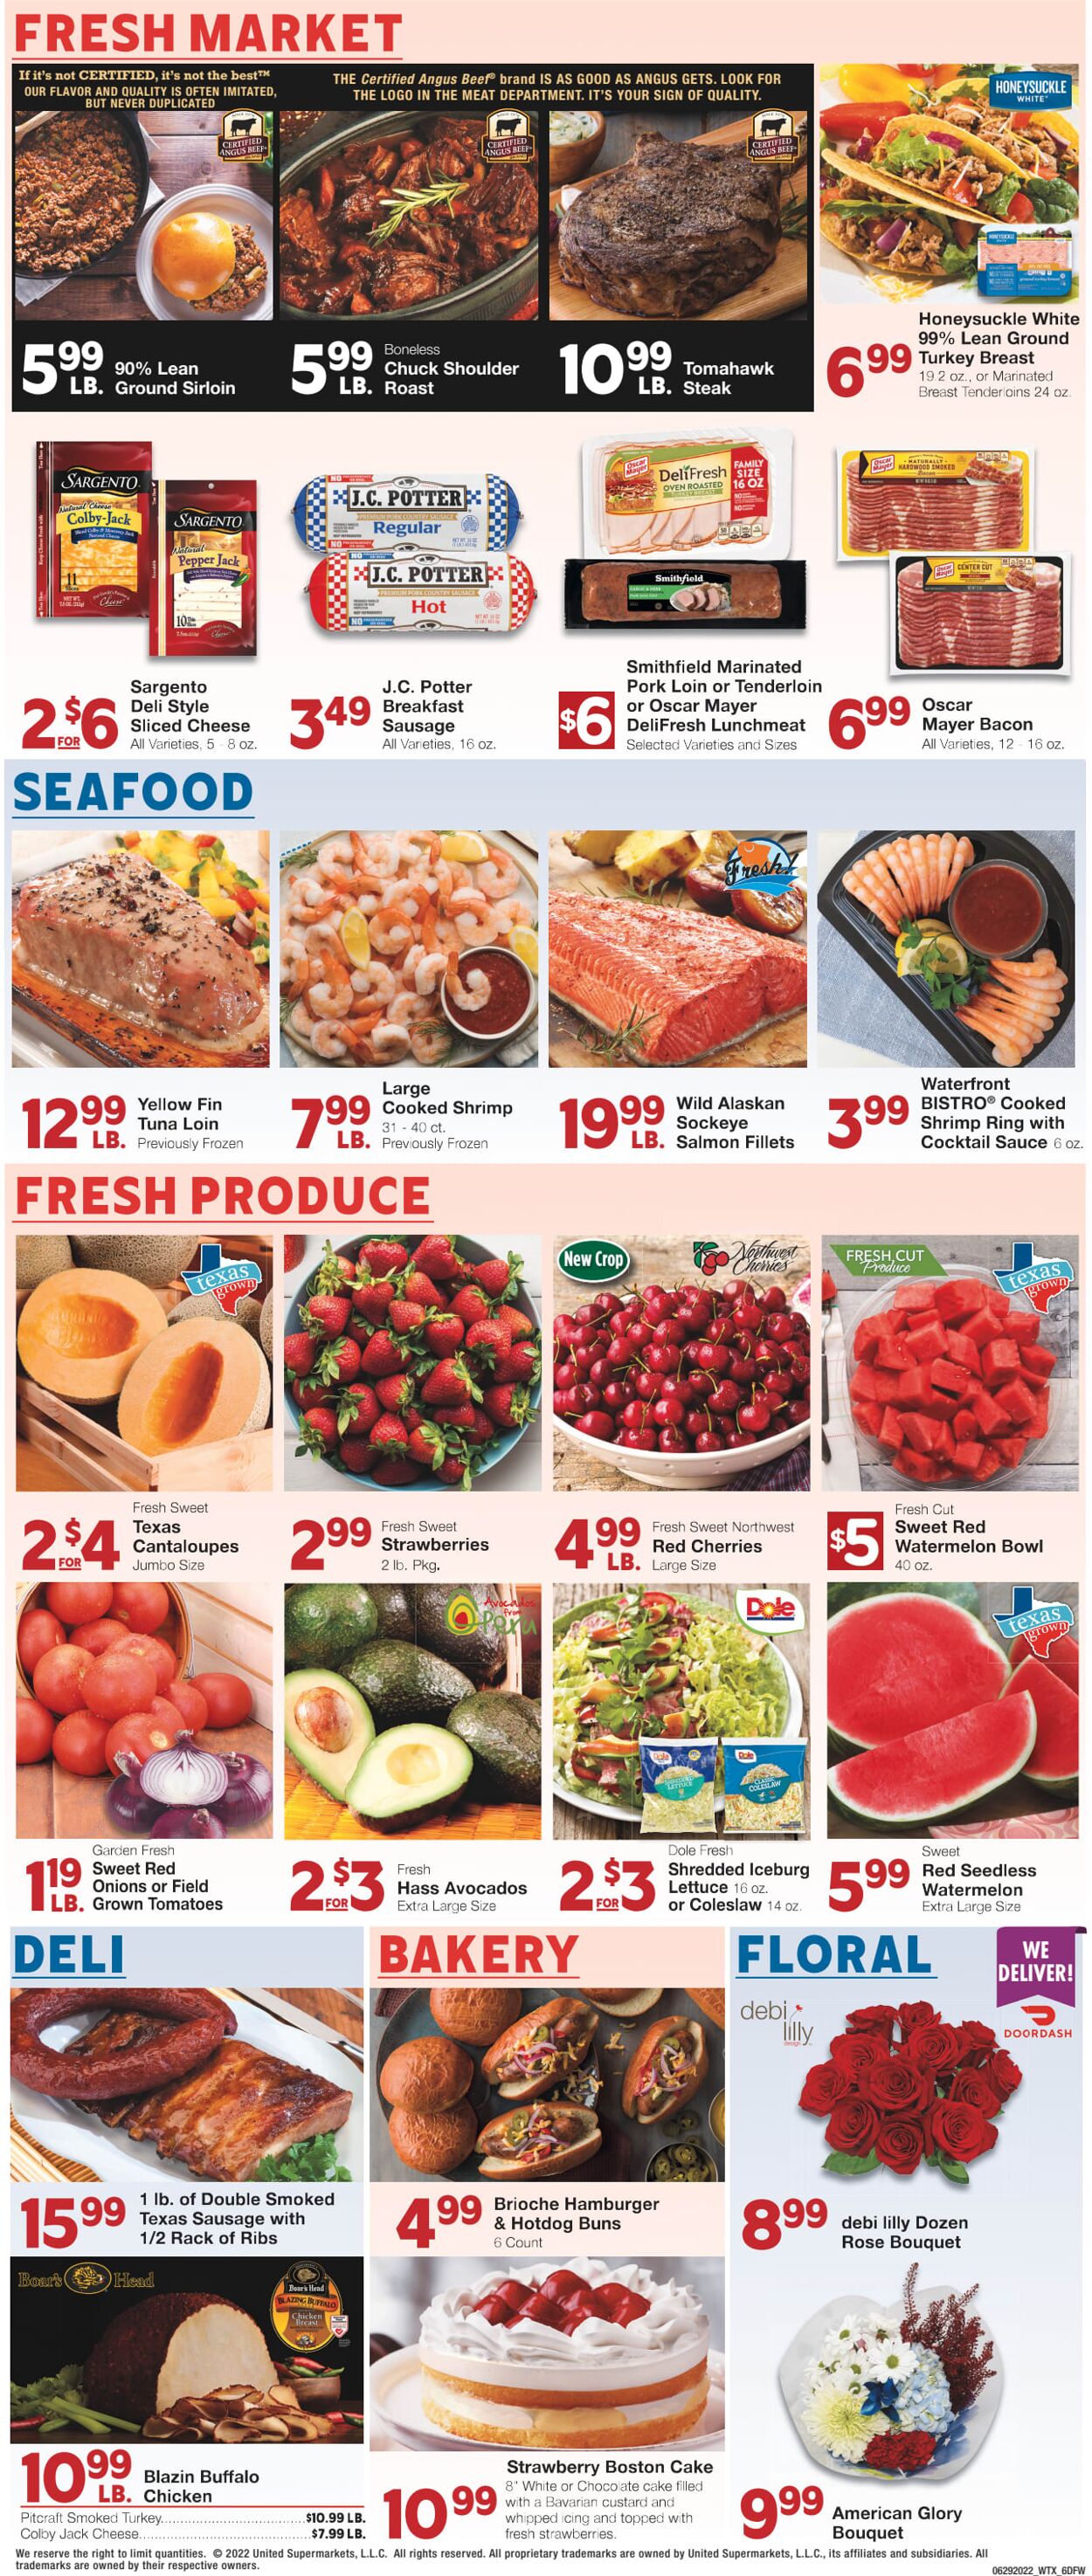 Weekly ad United Supermarkets 06/29/2022 - 07/05/2022